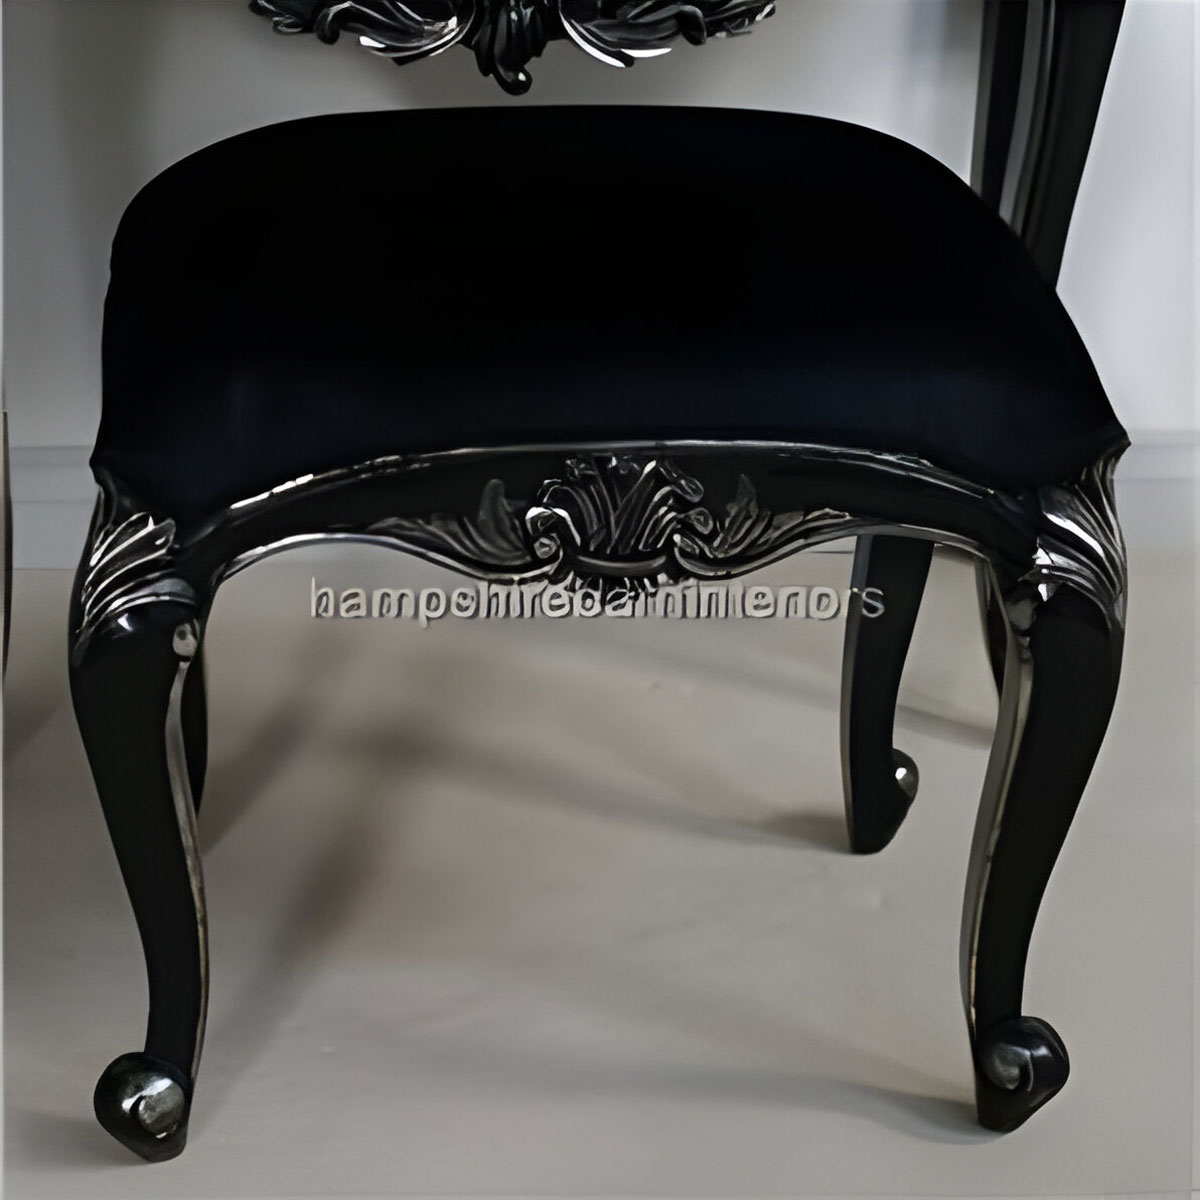 Belgravia Dressing Table Stool Shown In Silvered Black Finish Others Colours To Made To Order 2 - Hampshire Barn Interiors - Belgravia Dressing Table & Stool Shown In Silvered Black Finish Others Colours To Made To Order -